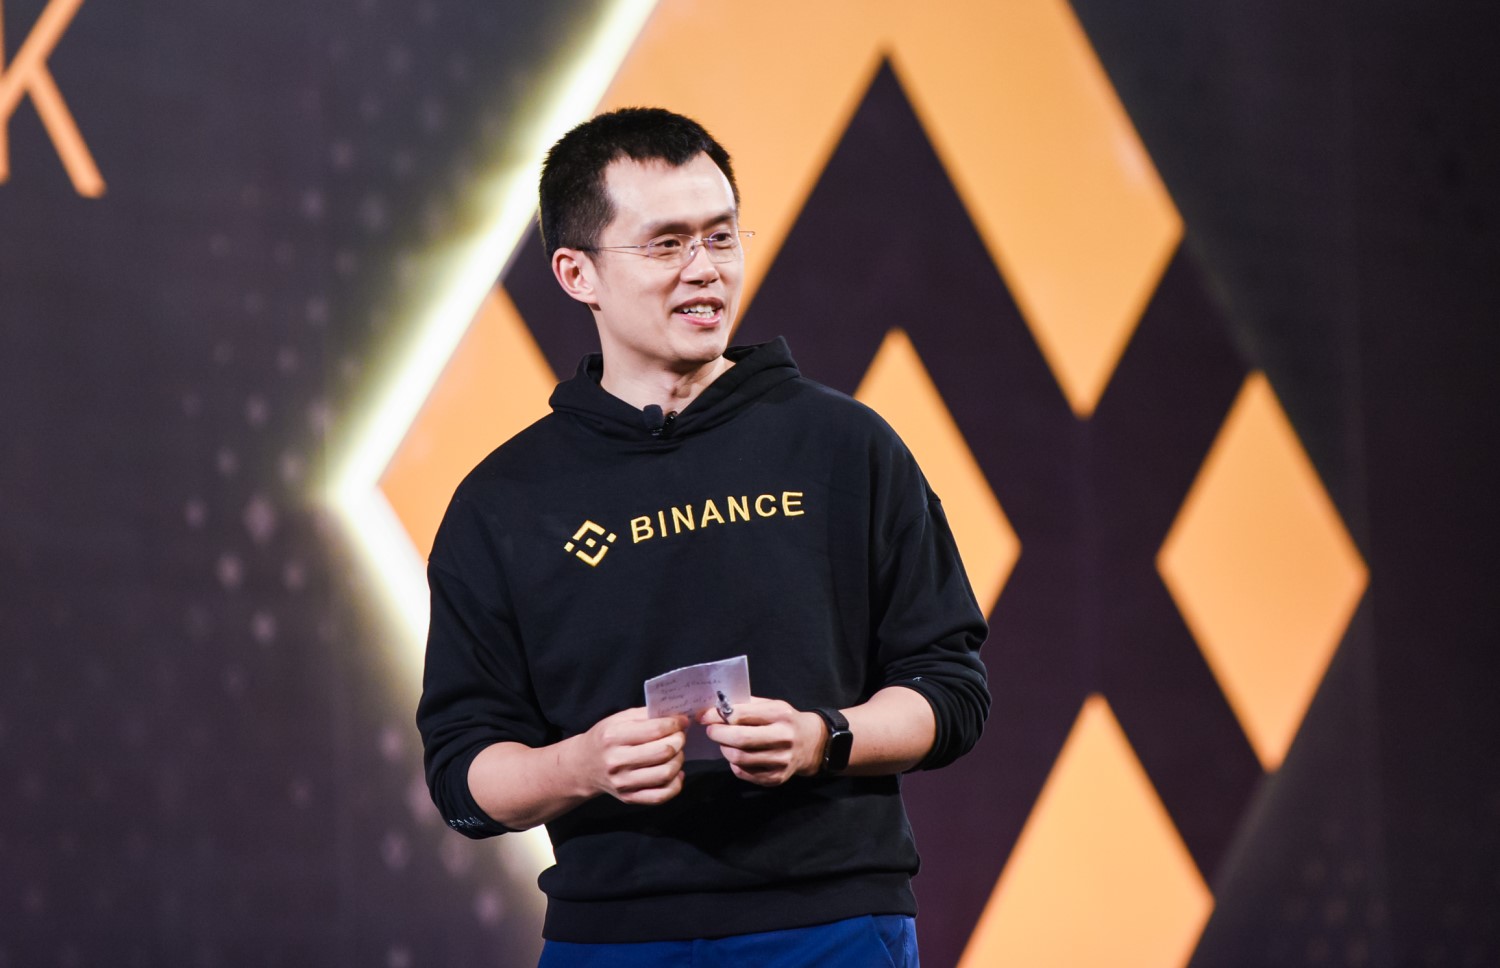 Binance-ceo-says-crypto-exchange-has-applied-for-a-singapore-license